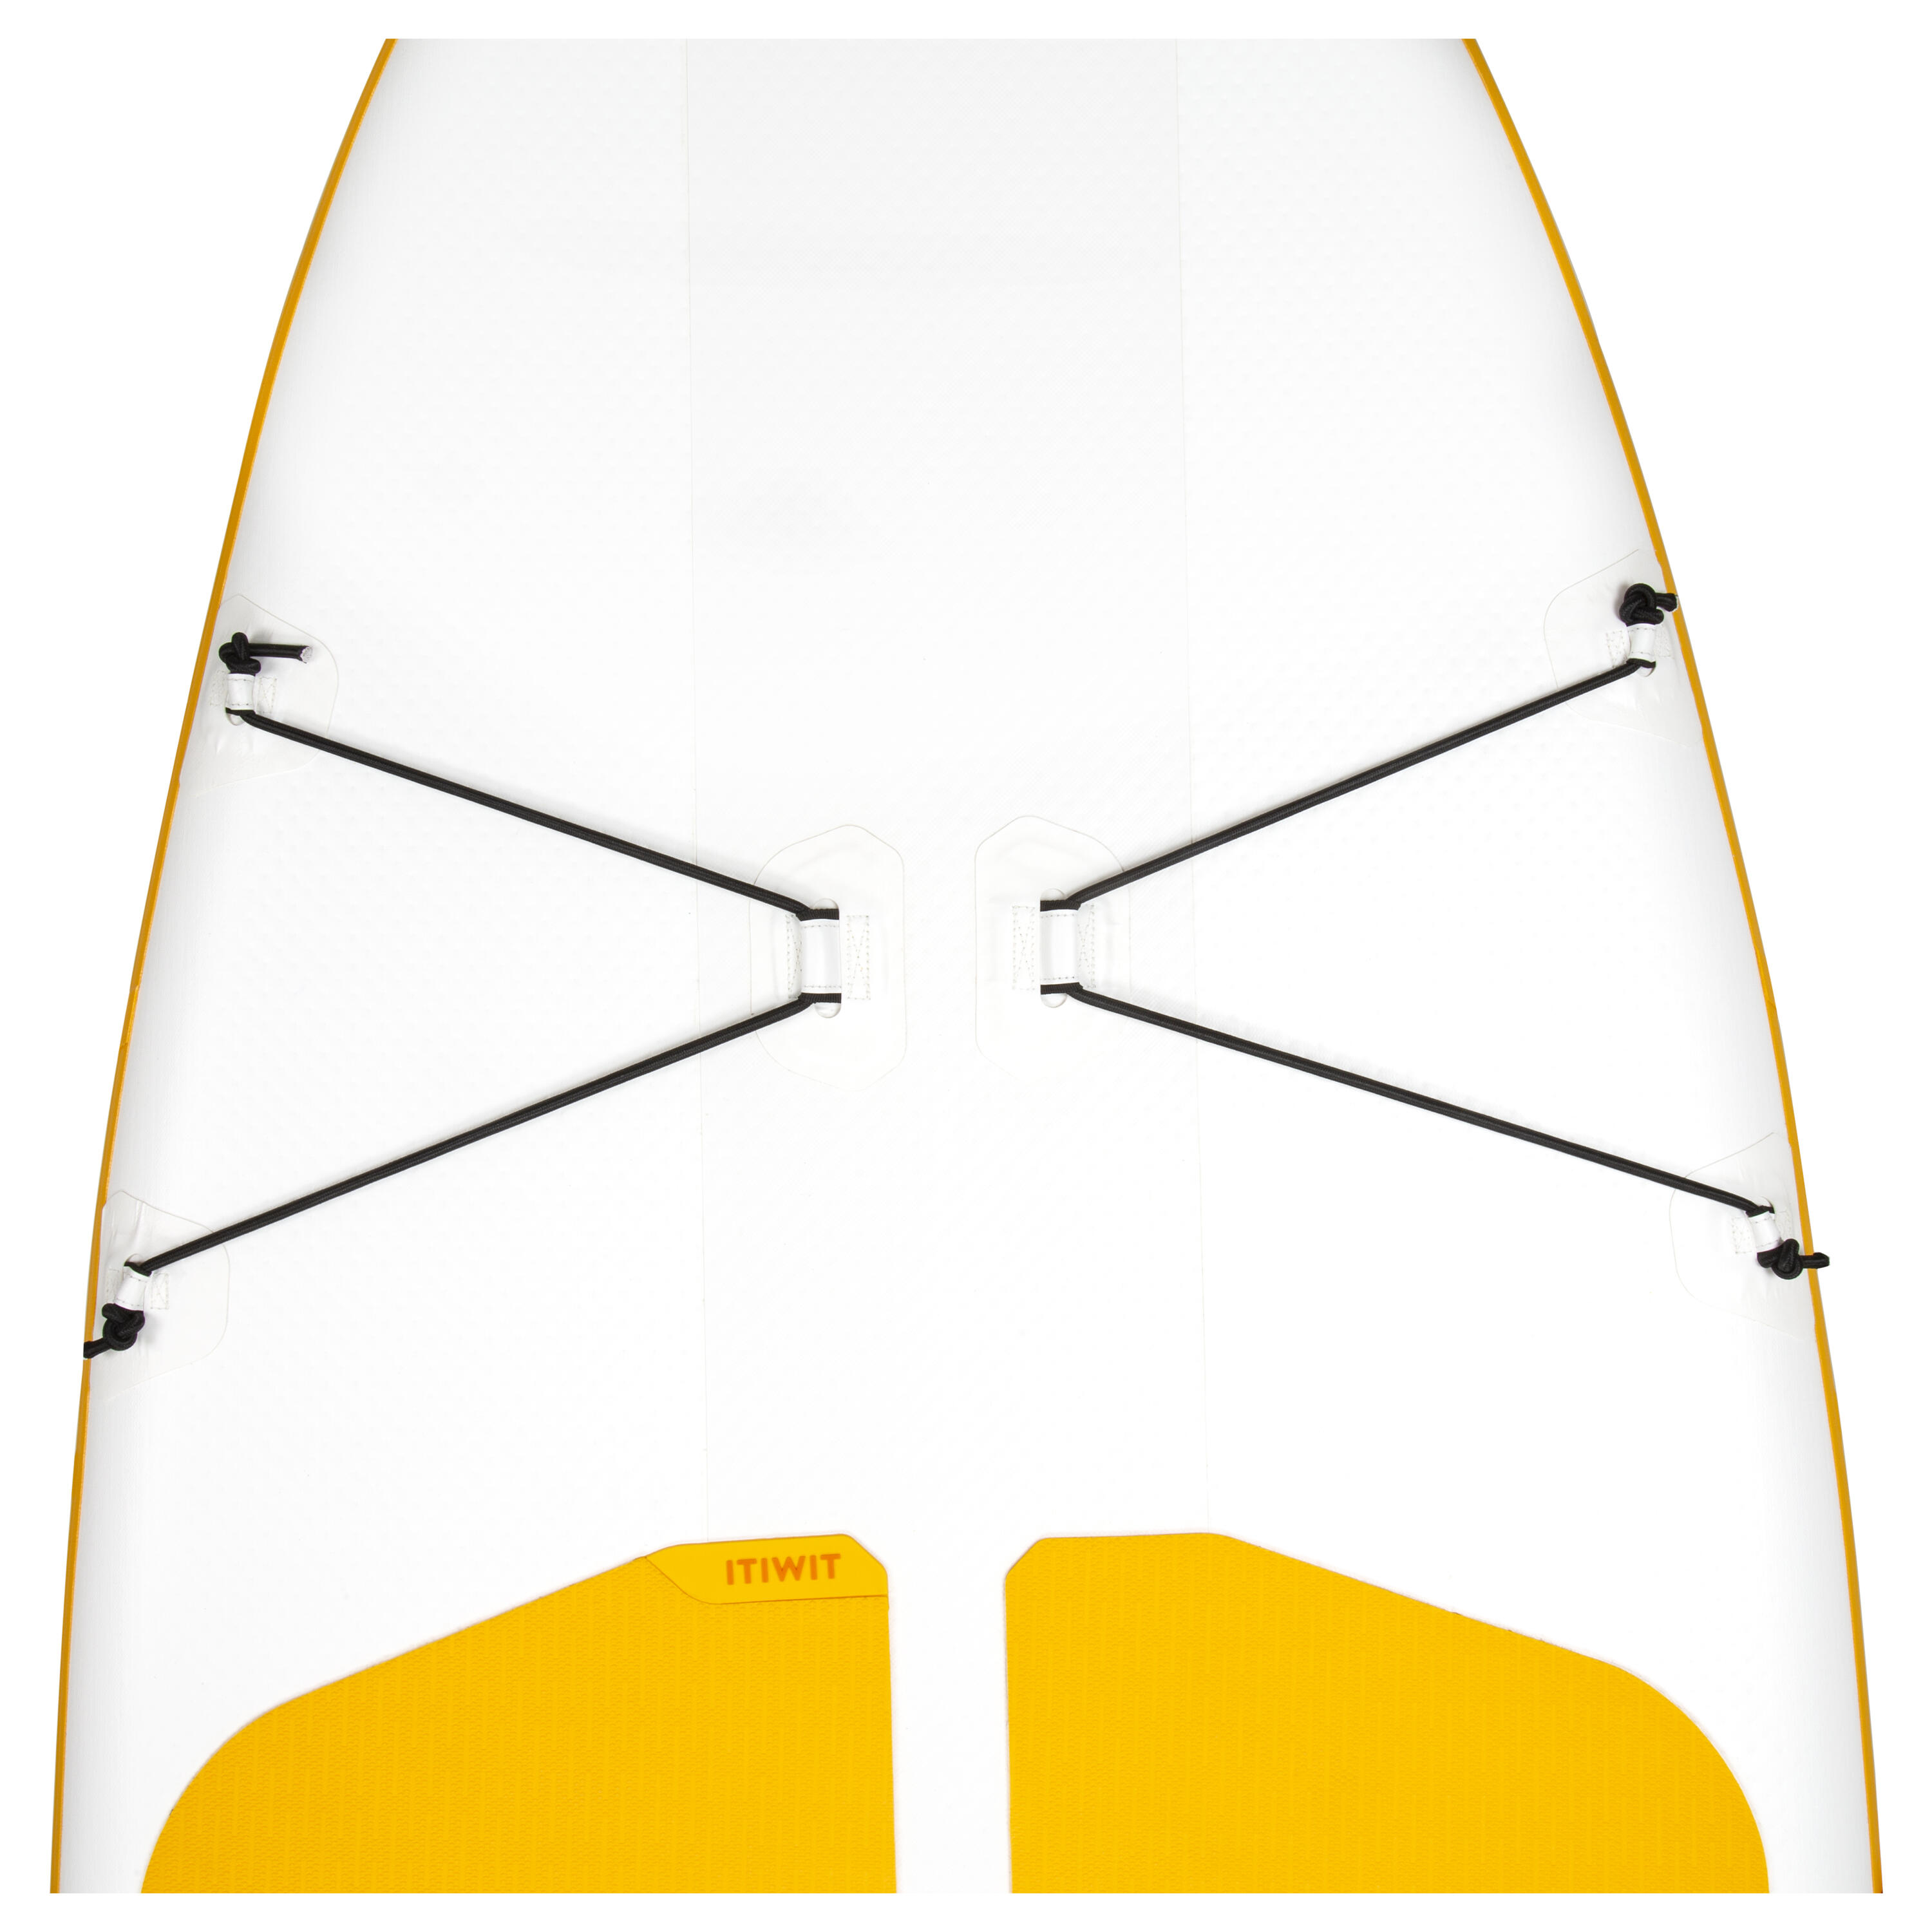 100 COMPACT 8FT (S) INFLATABLE STAND-UP PADDLEBOARD - YELLOW/WHITE (up to 60kg) 12/31